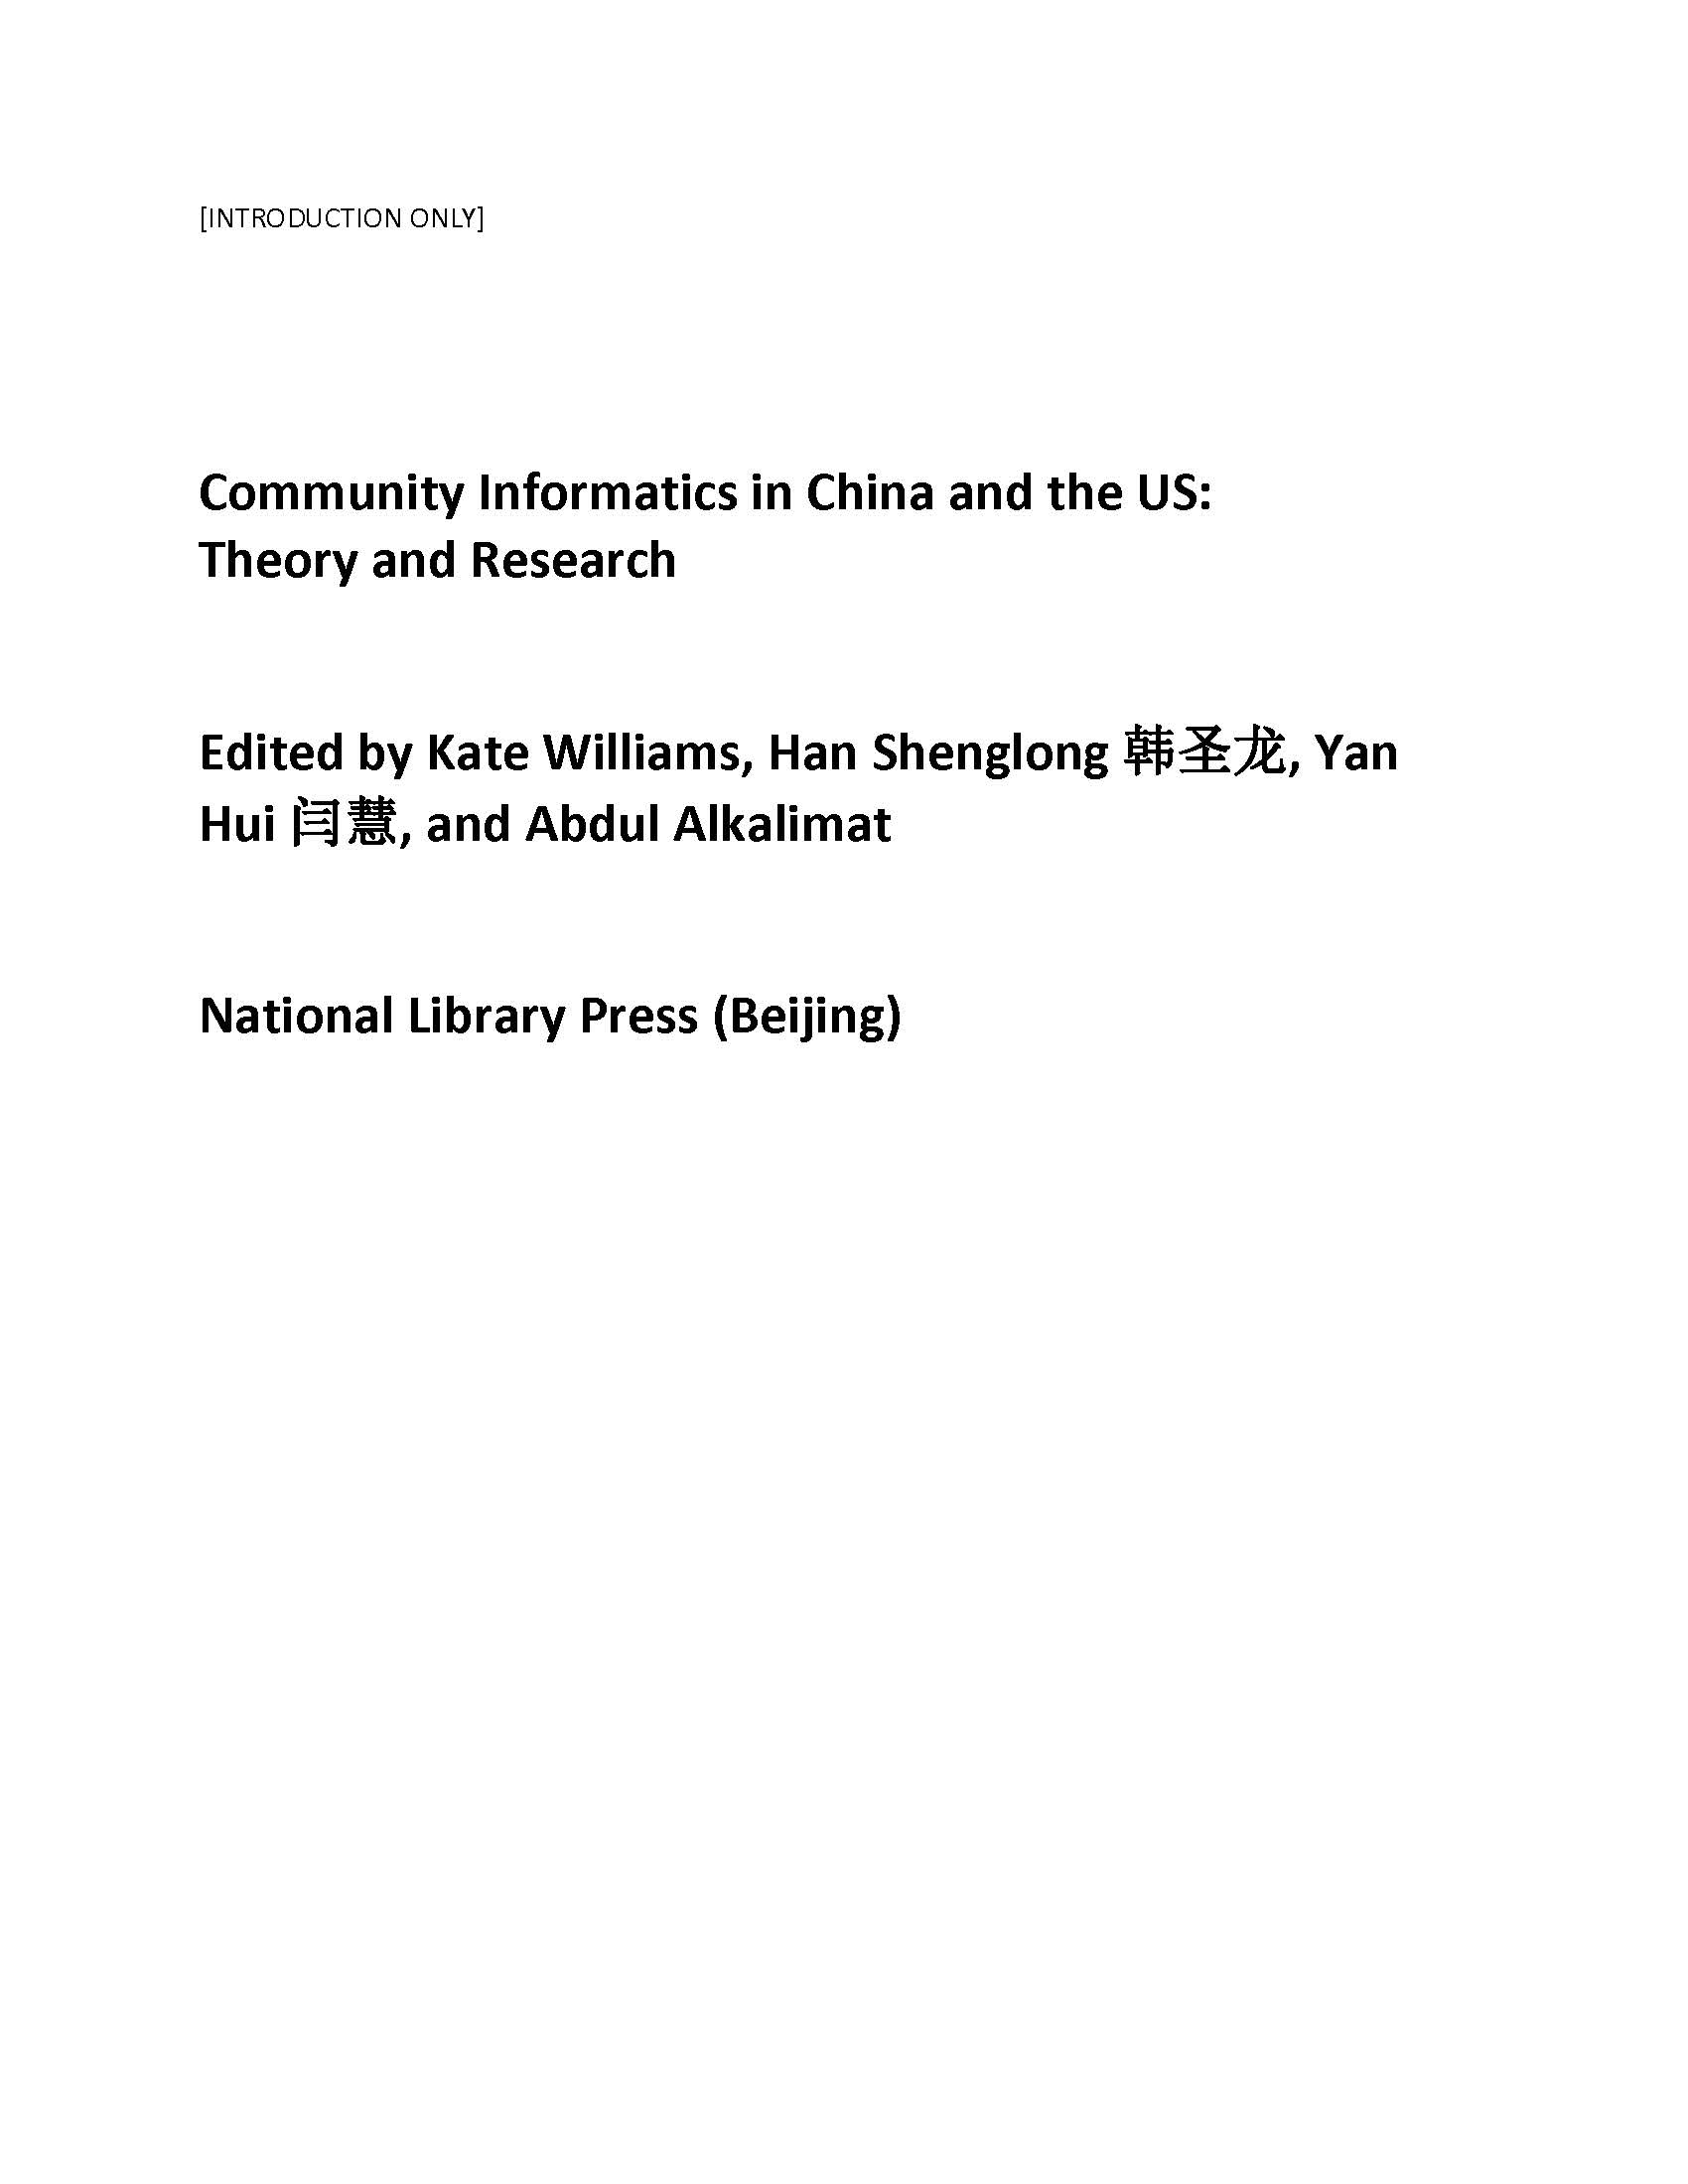  Community Informatics in China and the US 